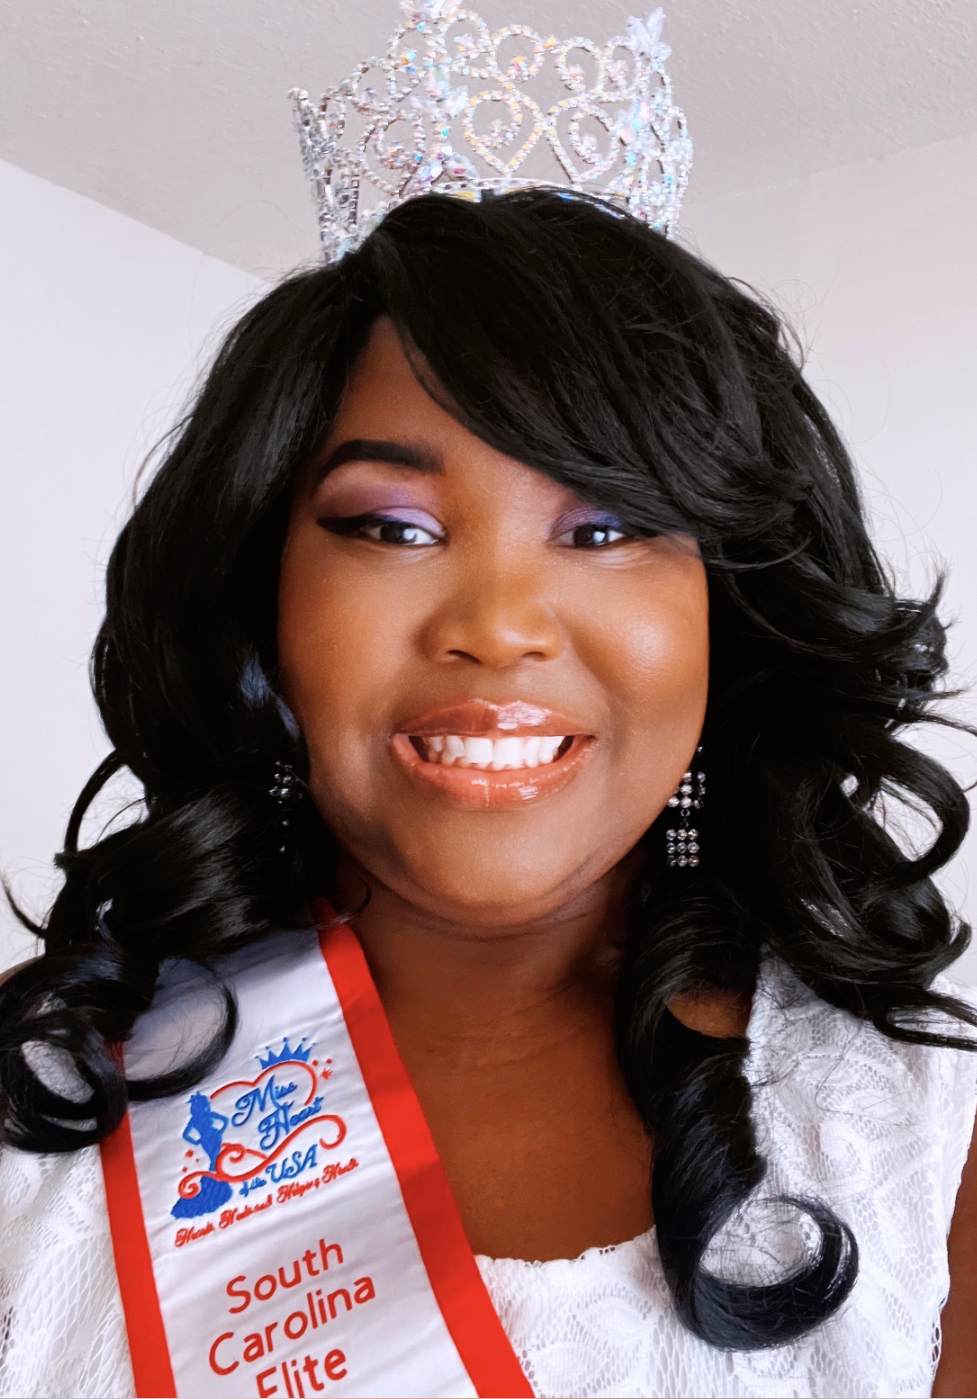 South Carolina Teacher is first to be crowned, "South Carolina Elite Ms. Heart of the USA" for Miss Heart of the USA